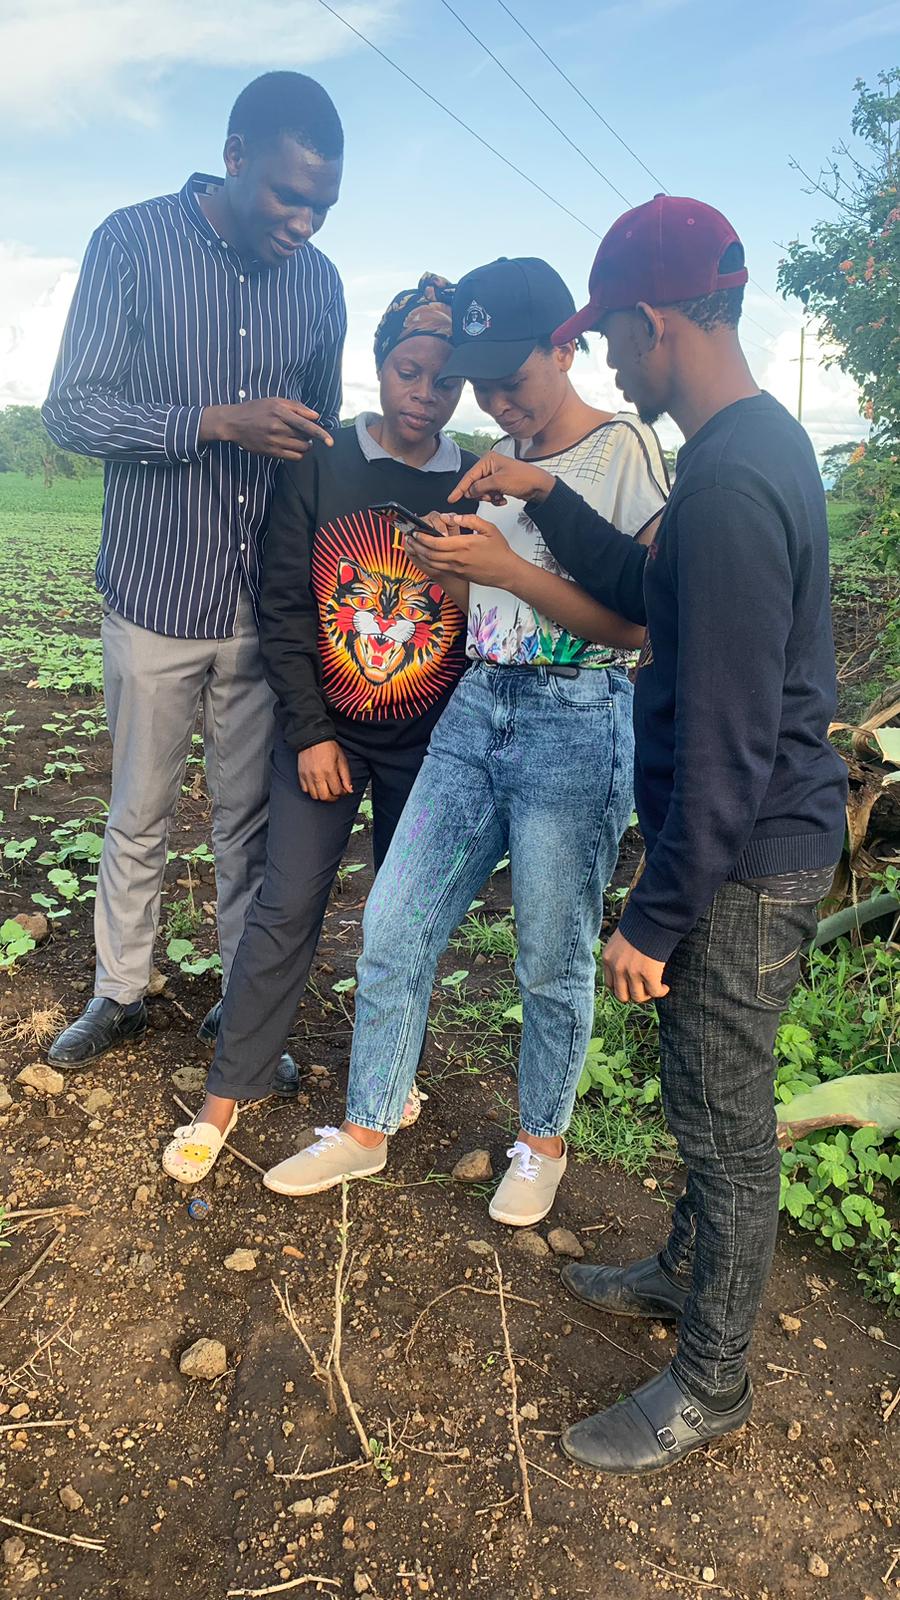 Four YouthMappers, who are university students, huddle around a mobile phone in crop field as they conduct field research in a region in Tanzania